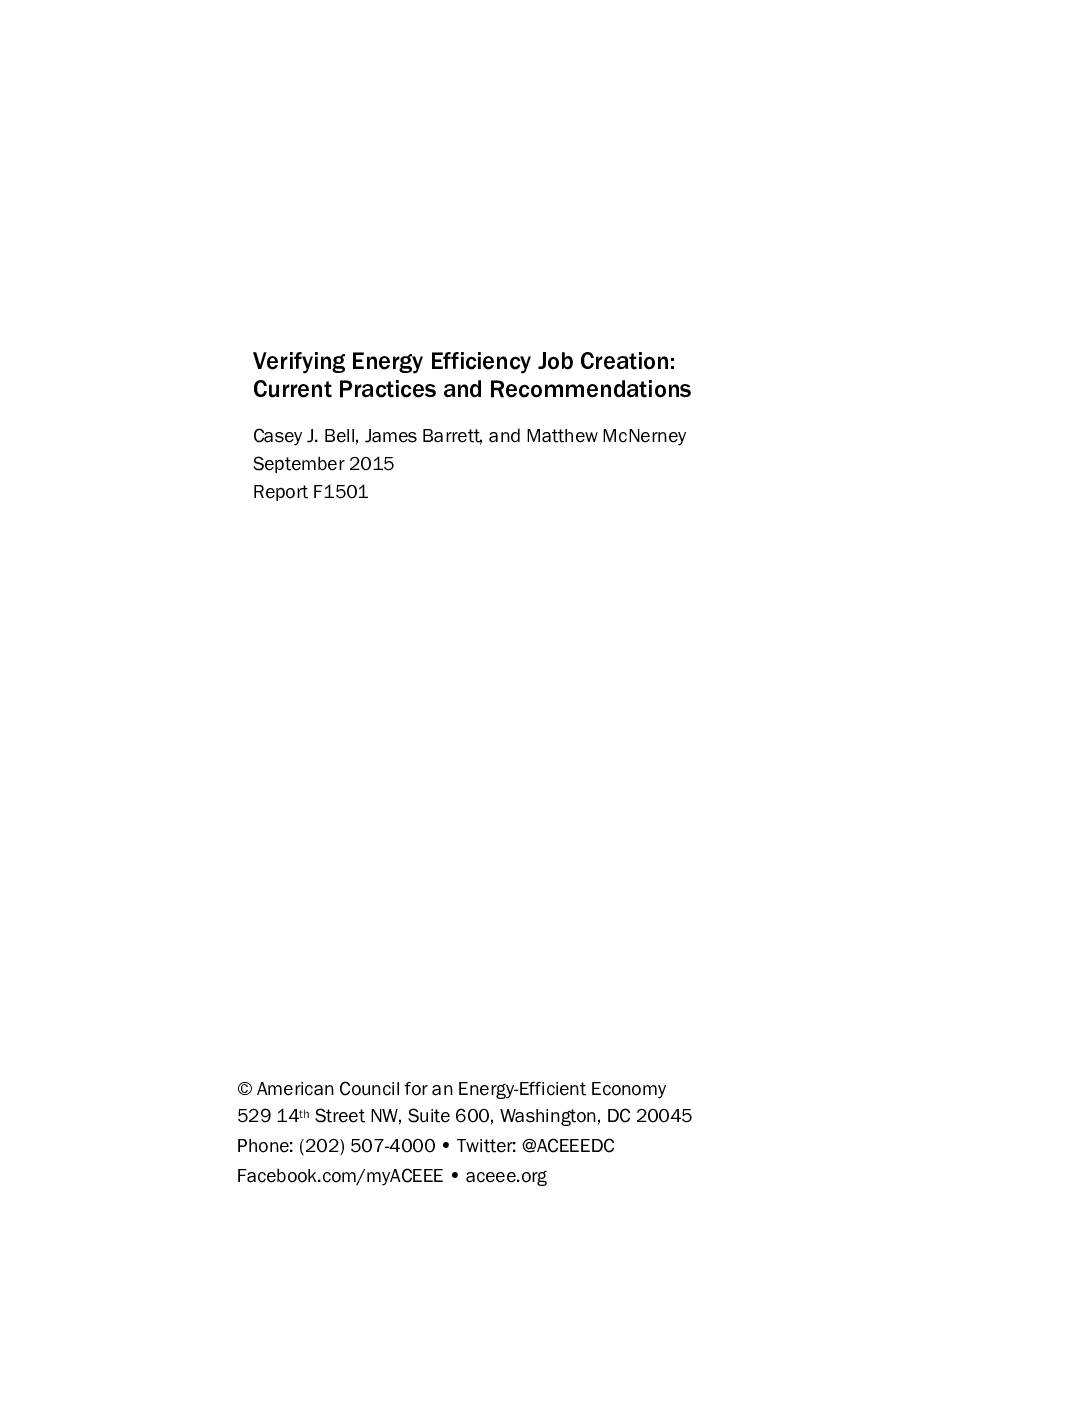 Verifying Energy Efficiency Job Creation: Current Practices and Recommendations